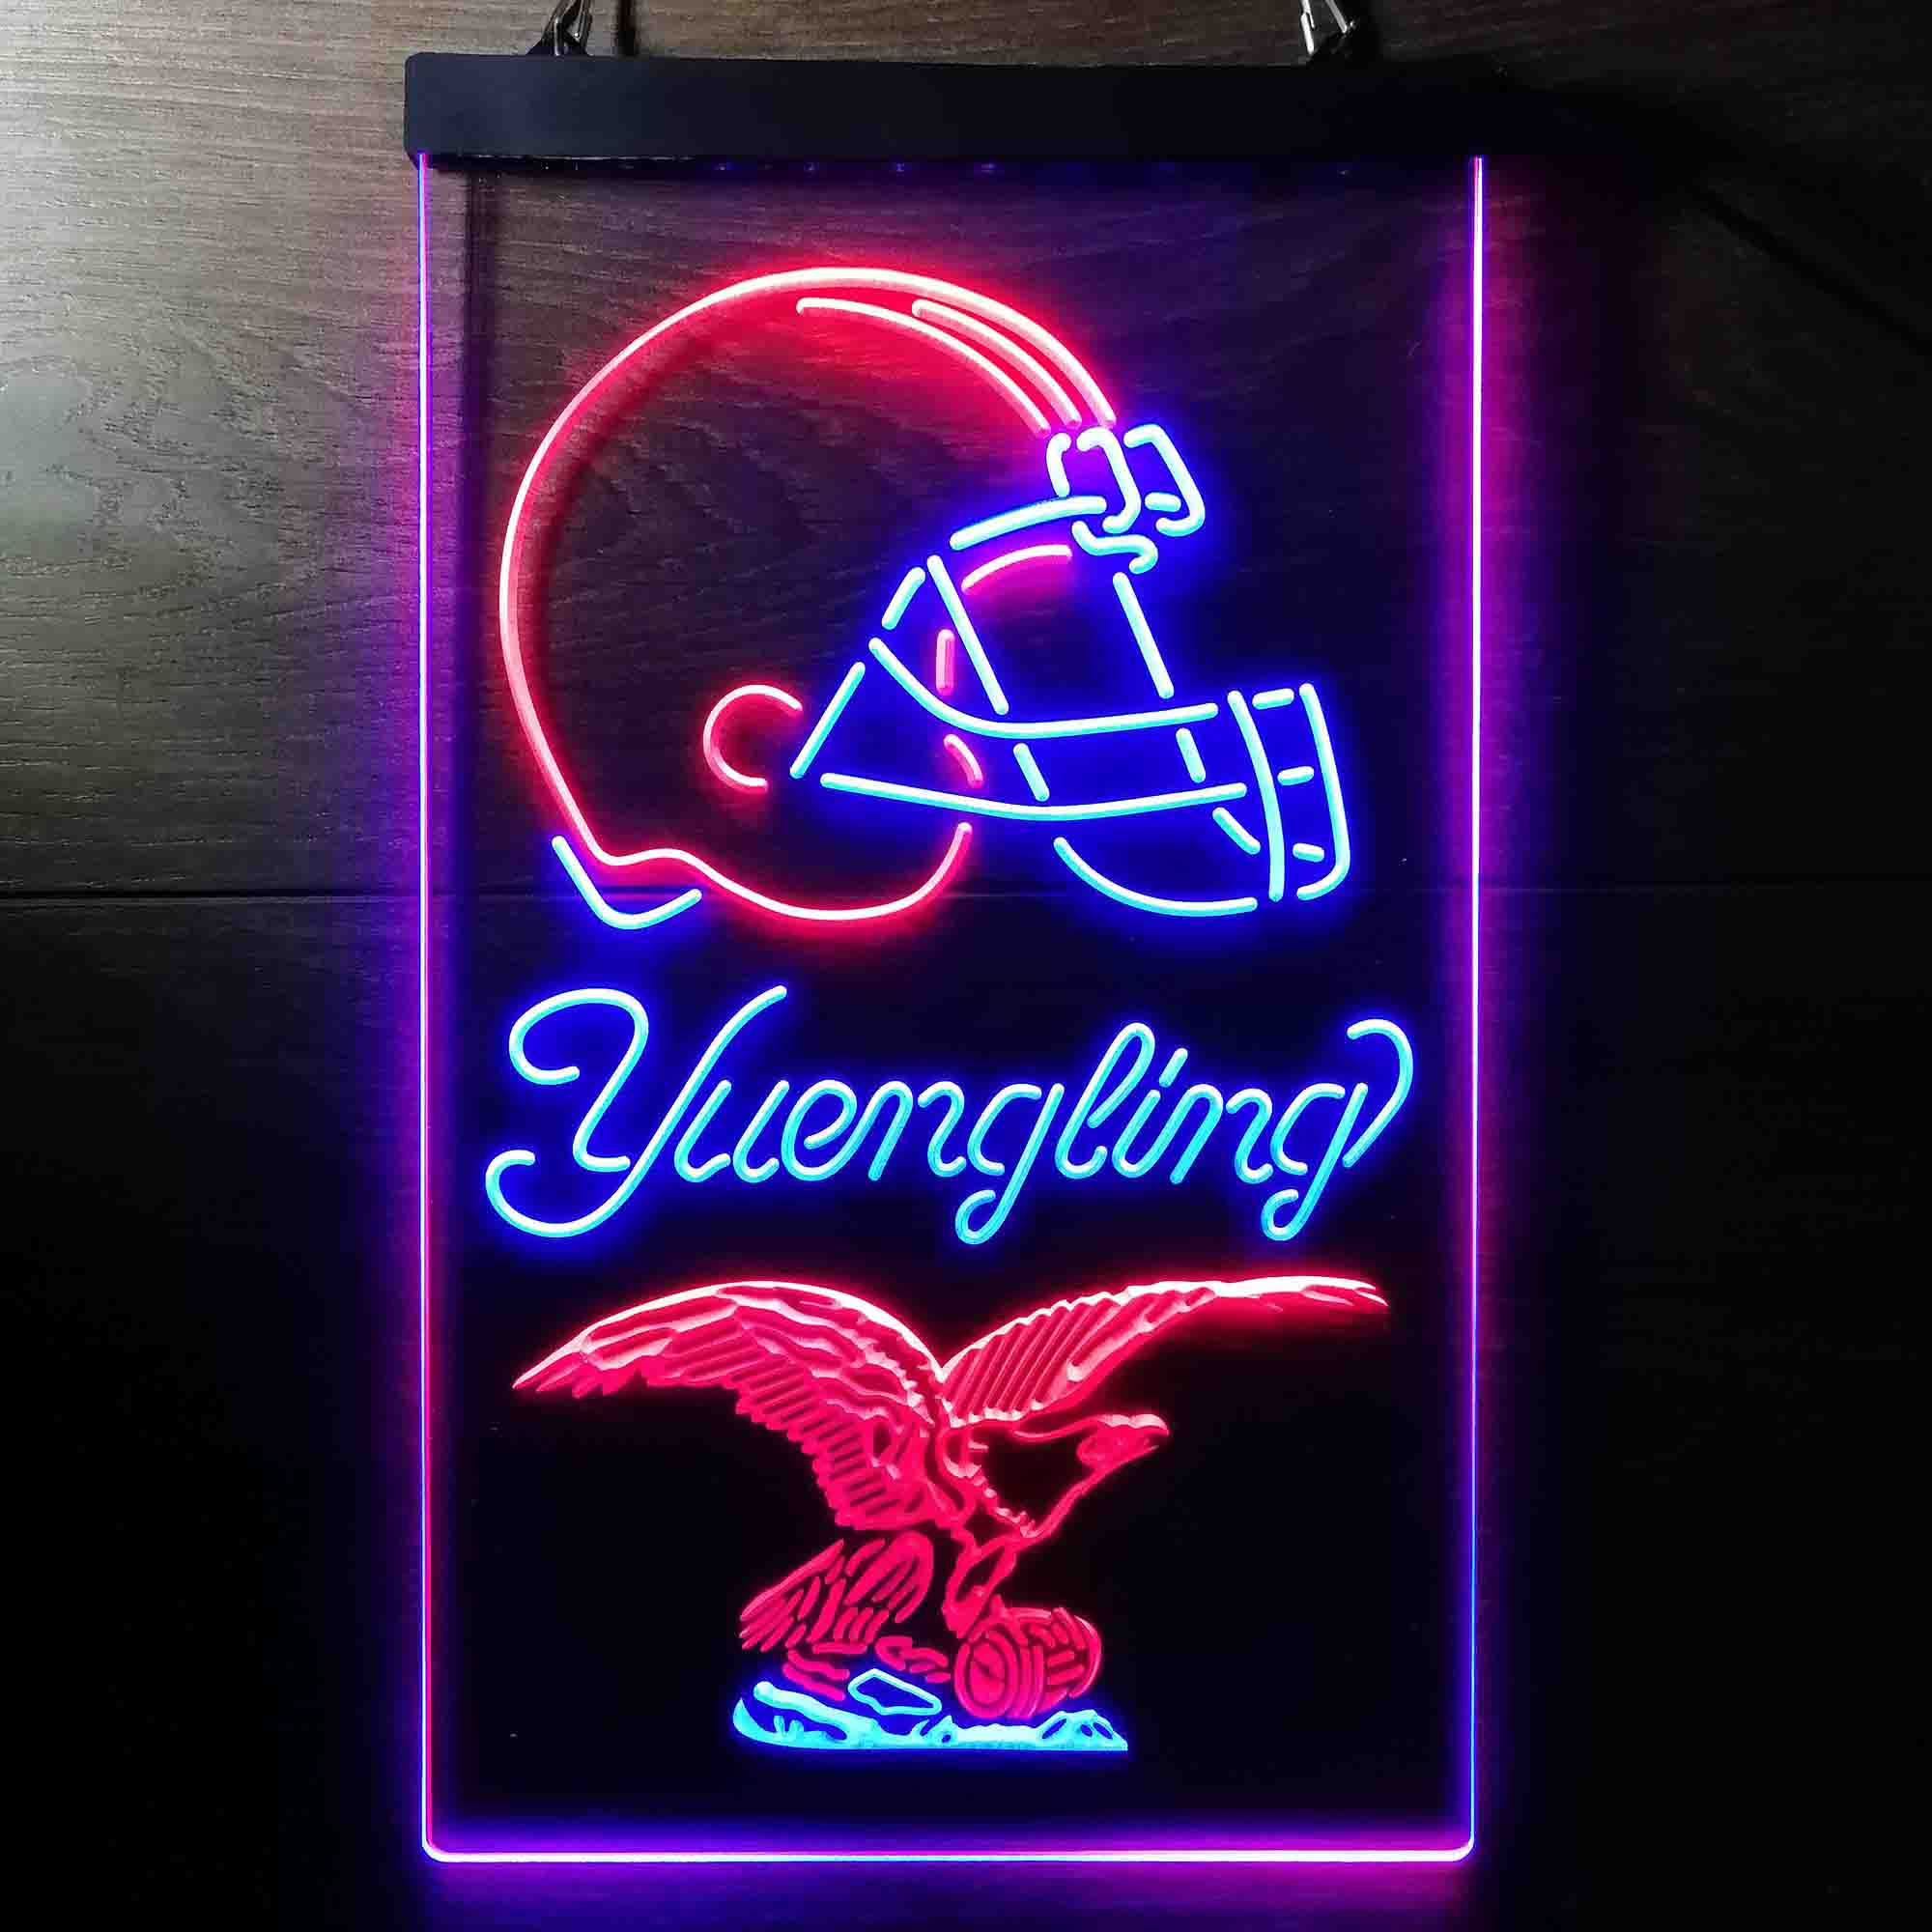 Yuengling Bar Cleveland Browns Est. 1946 Neon-Like LED Sign